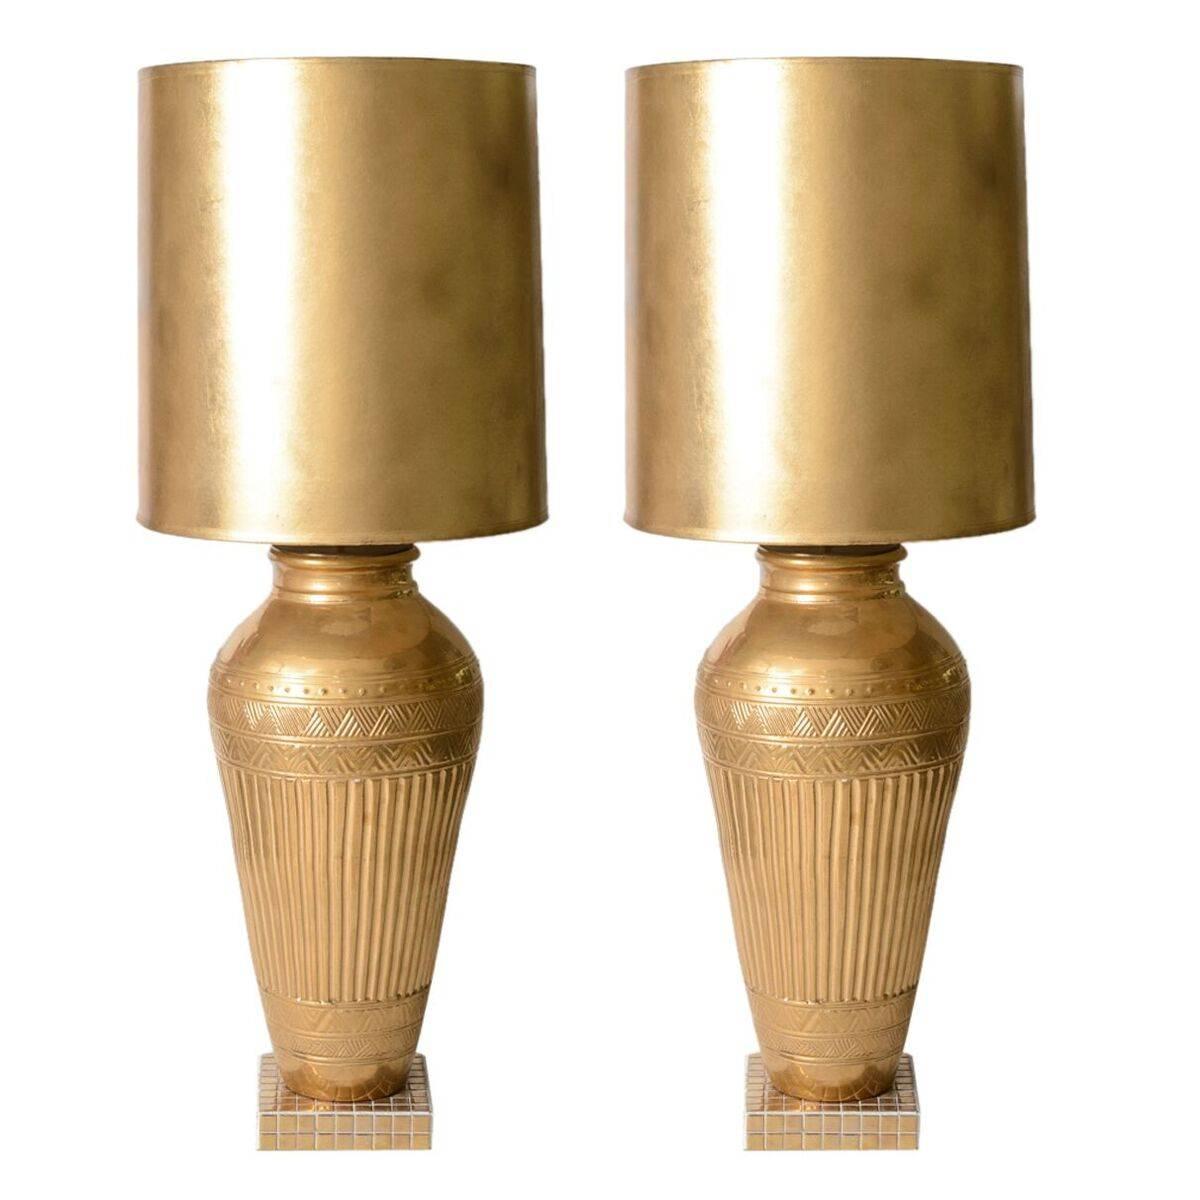 Pair of Hollywood Regency Style Table Lamps with Ron Dier Gold Ceramic Vases